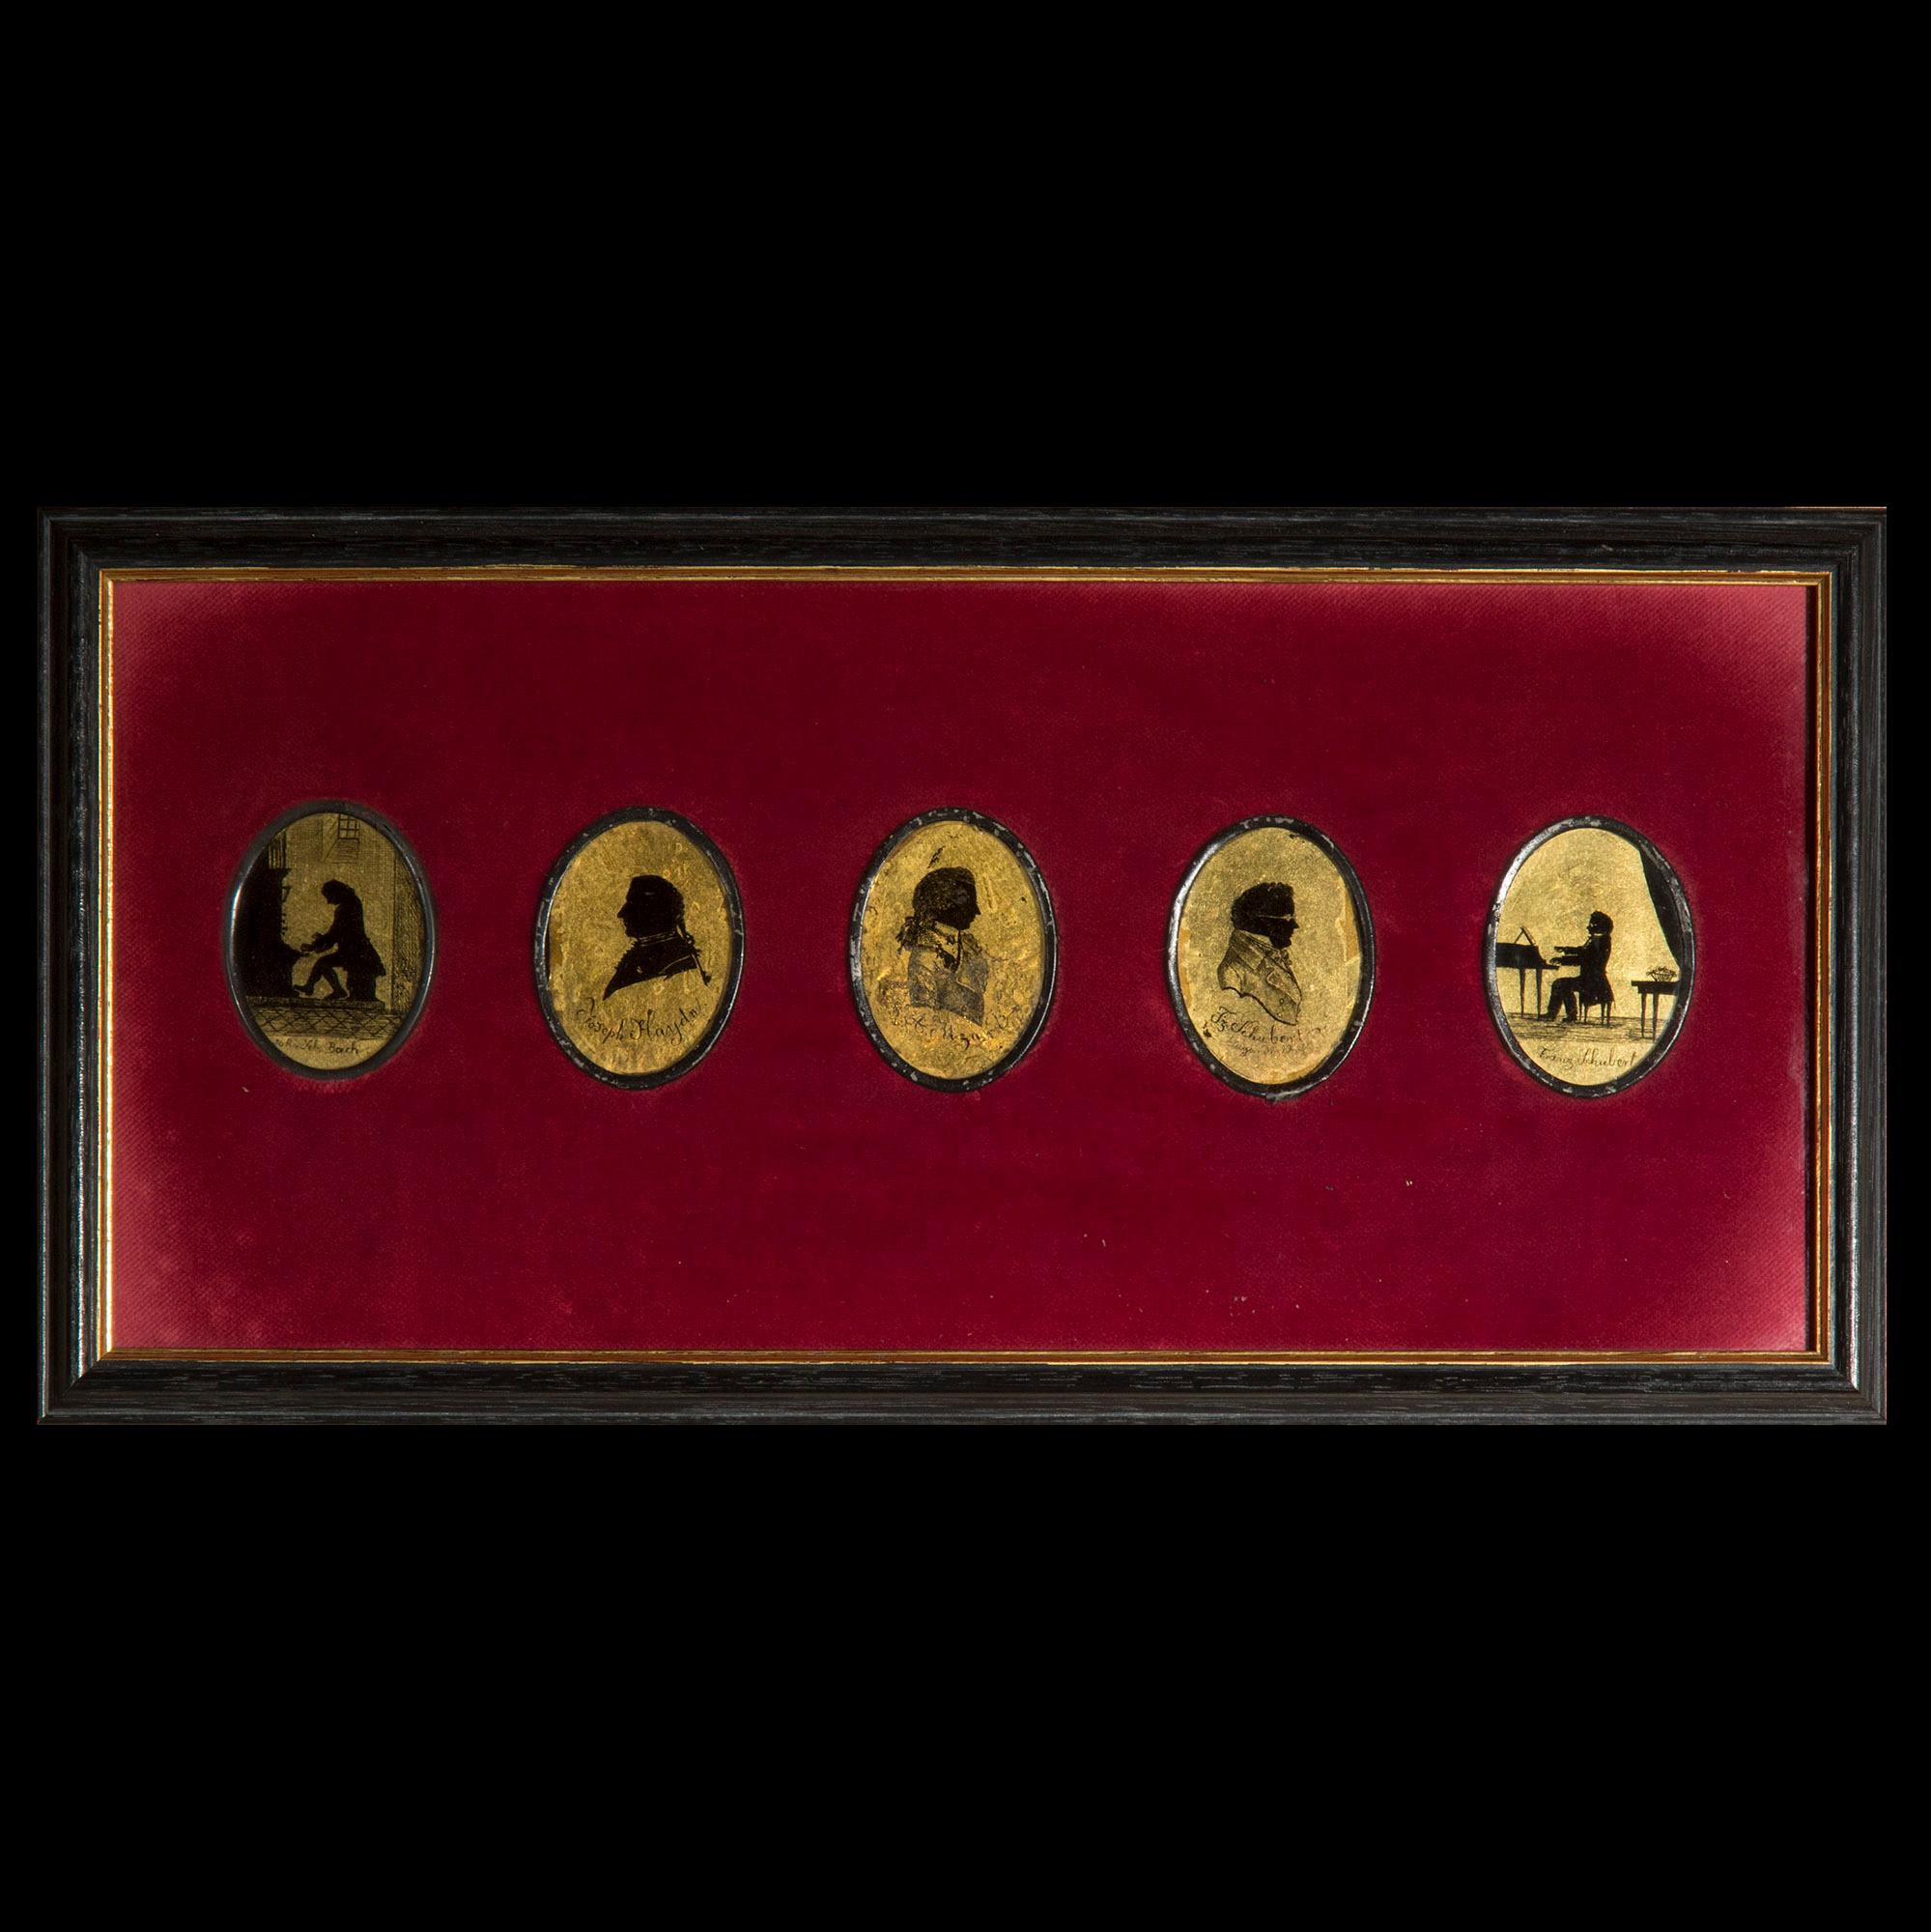 A charming 19th century framed set of five gold leaf silhouettes of classical composers, to include Bach, Haydn, Mozart and Schubert.

Why we like them
A superbly decorative set of exquisite medallions, a very chic addition to a Classic, eclectic